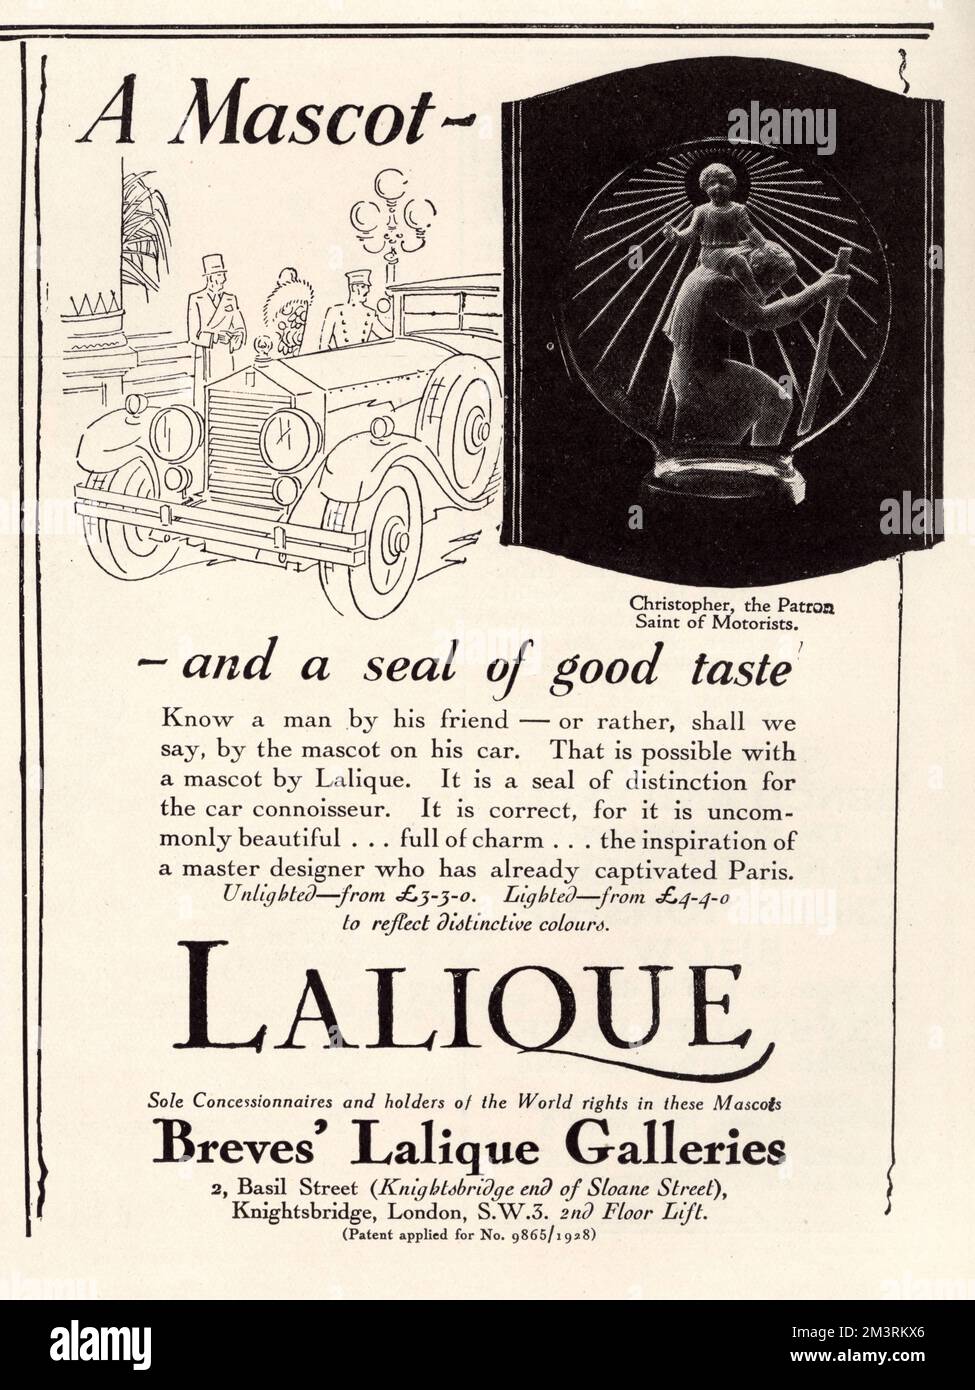 An advertisement for a Lalique car mascot from Breves' Lalique Galeries, Knightbridge; 'A mascot - and a seal of good taste'. The advertisement contains a small illustration of a car and an image of a mascot of Christopher, the Patron Saint of Motorists.      Date: 1928 Stock Photo